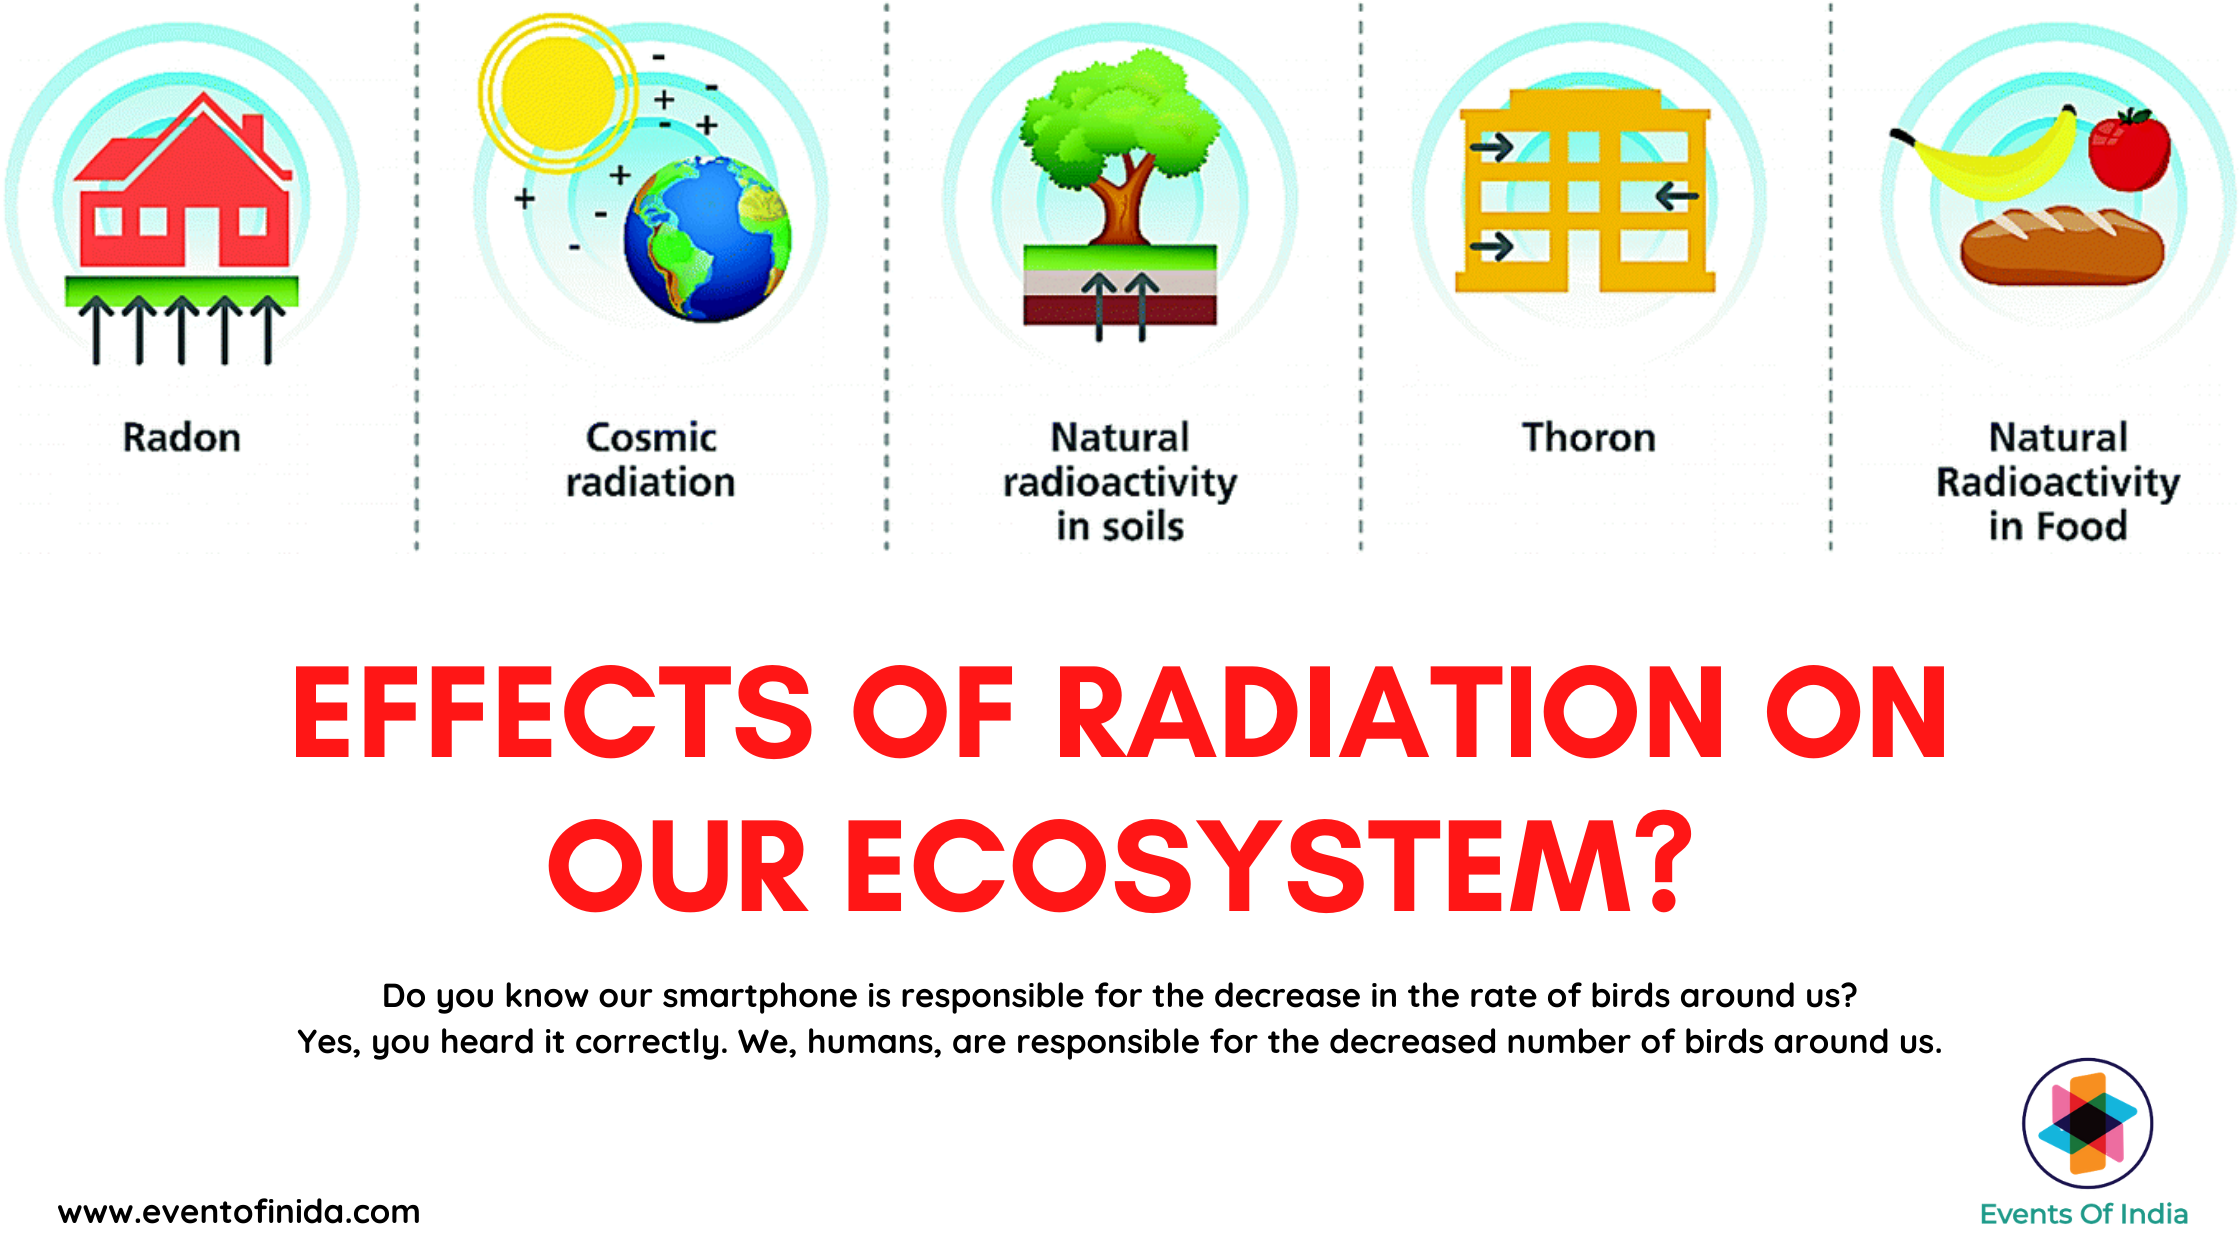 What are the effects of radiation on our ecosystem? Are humans responsible for it?